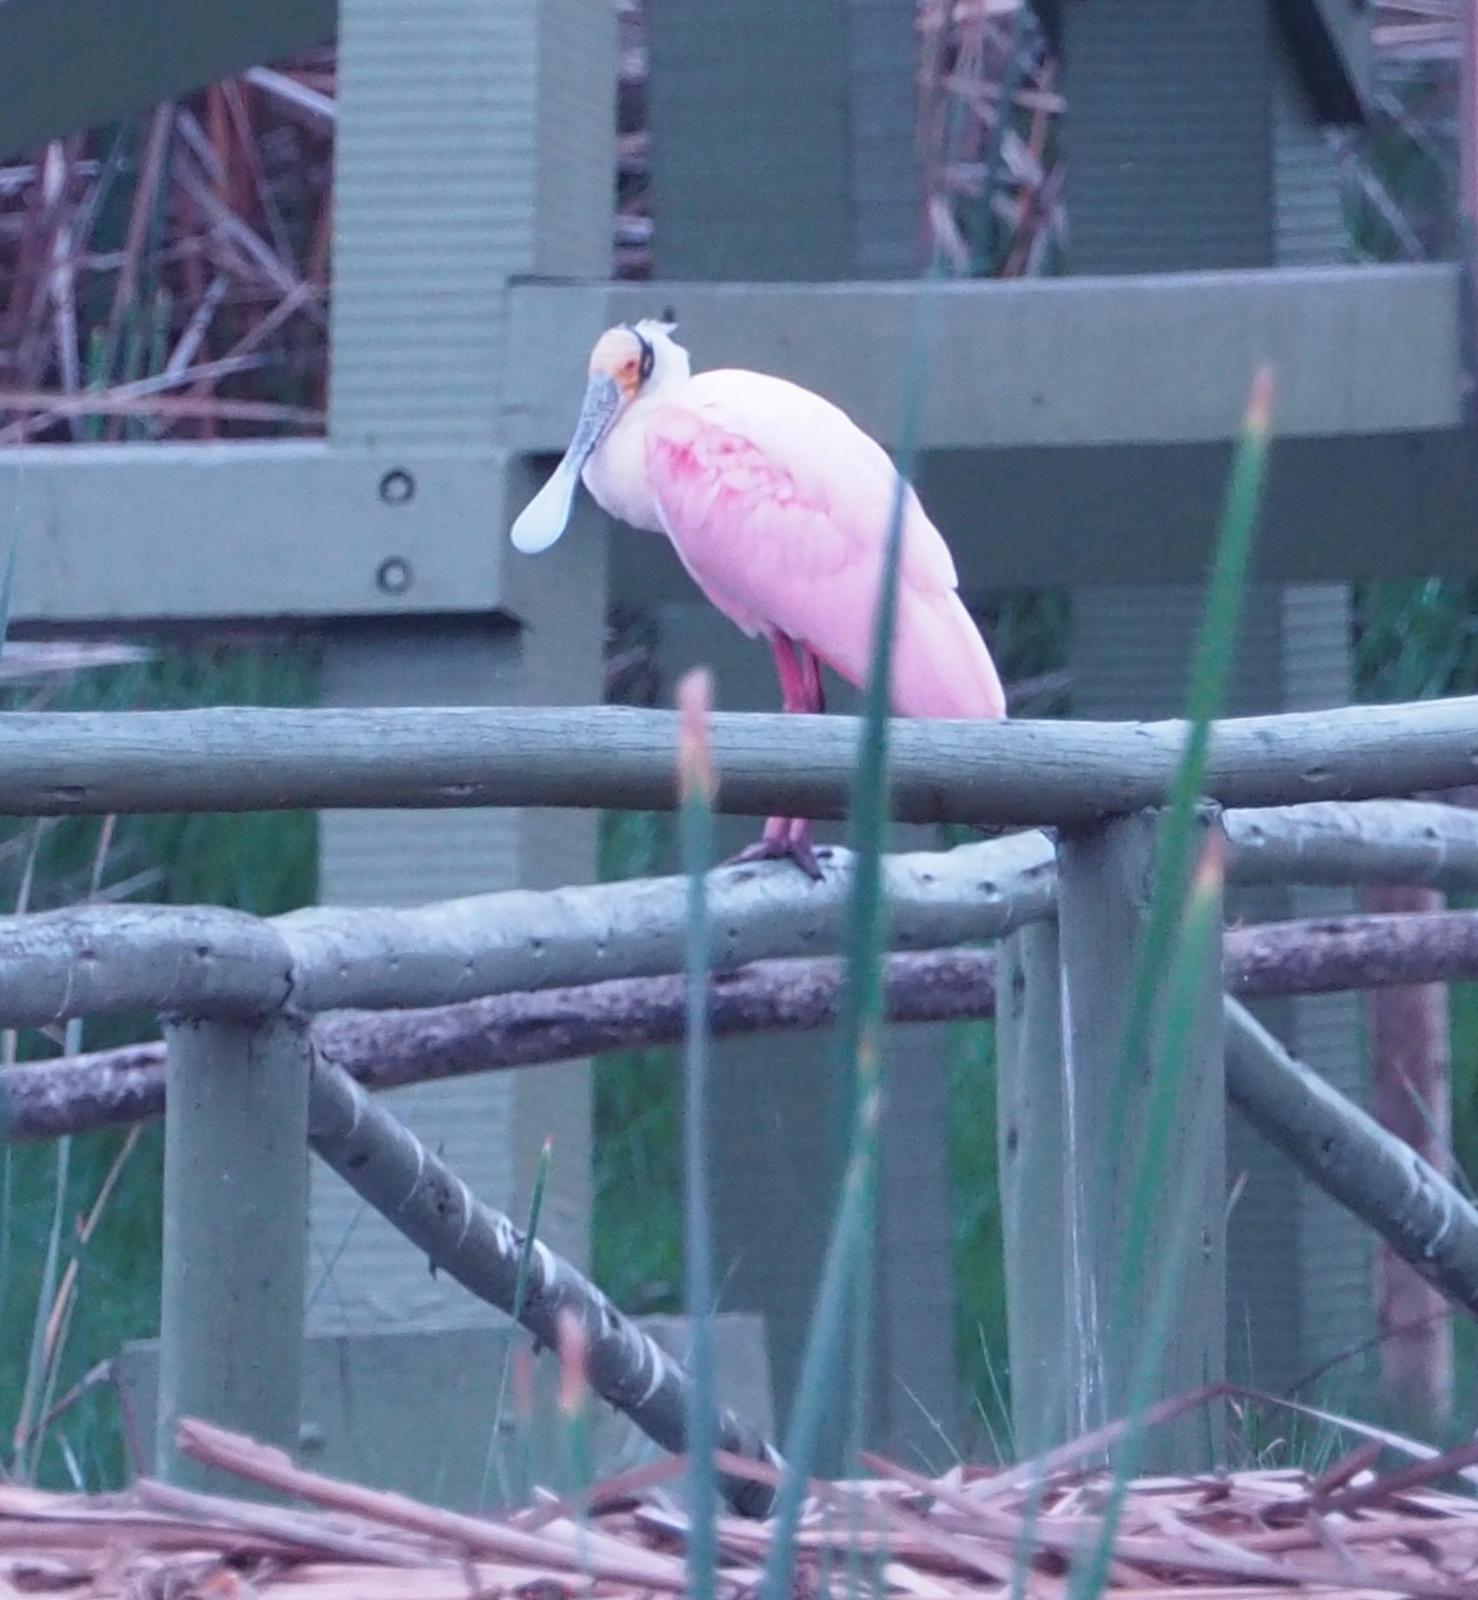 Roseate Spoonbill Photo by Geraint Langford